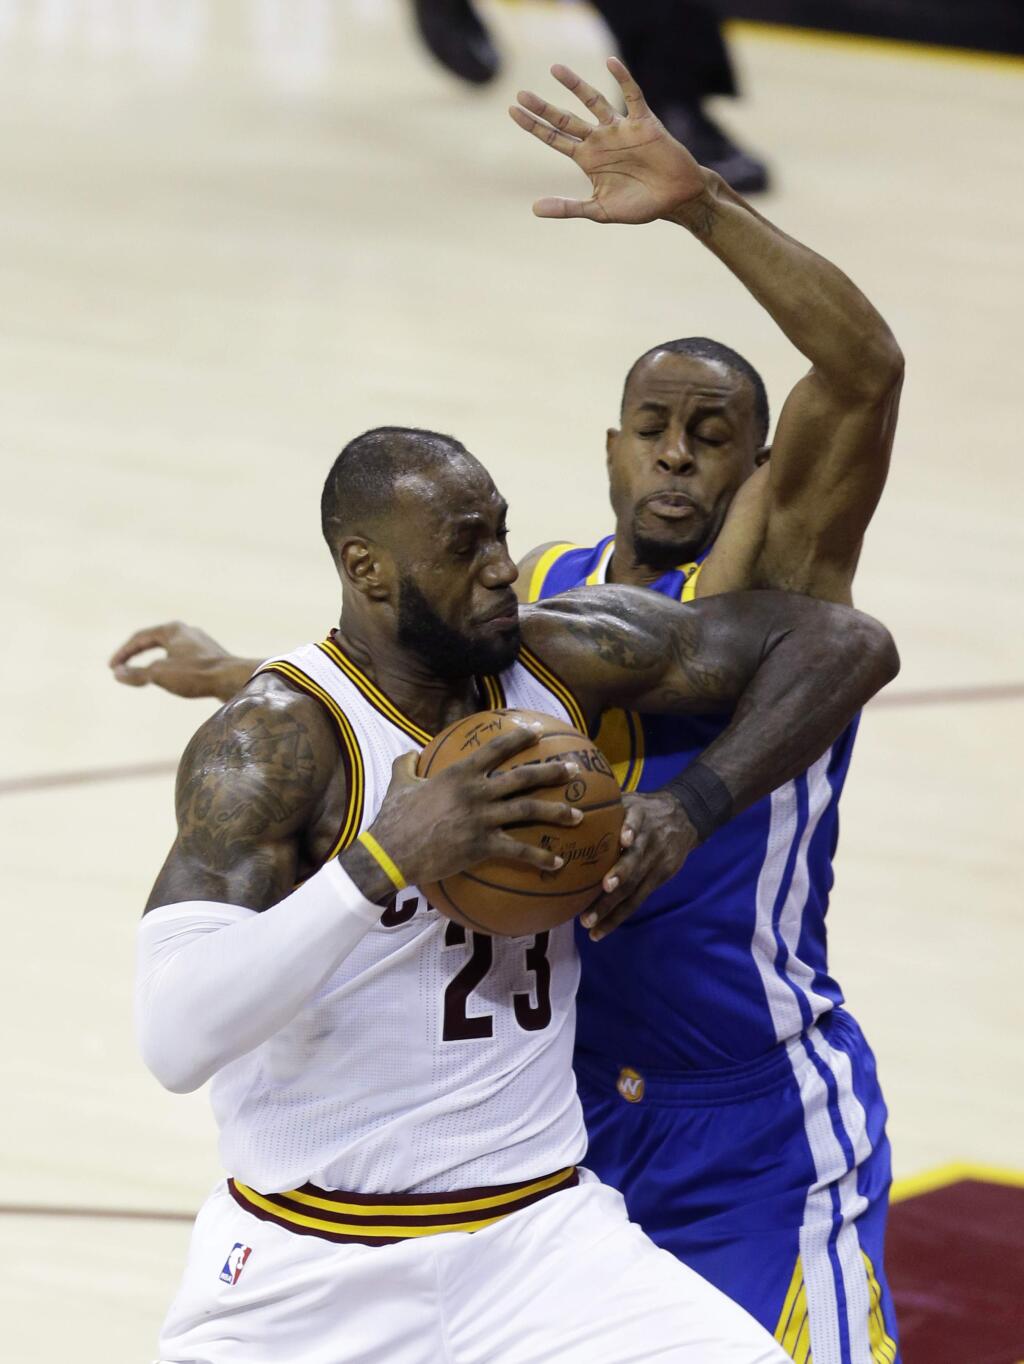 Cleveland Cavaliers forward LeBron James (23) drives on Golden State Warriors forward Andre Iguodala, right, during the second half of Game 3 of basketball's NBA Finals in Cleveland, Wednesday, June 7, 2017. (AP Photo/Tony Dejak)